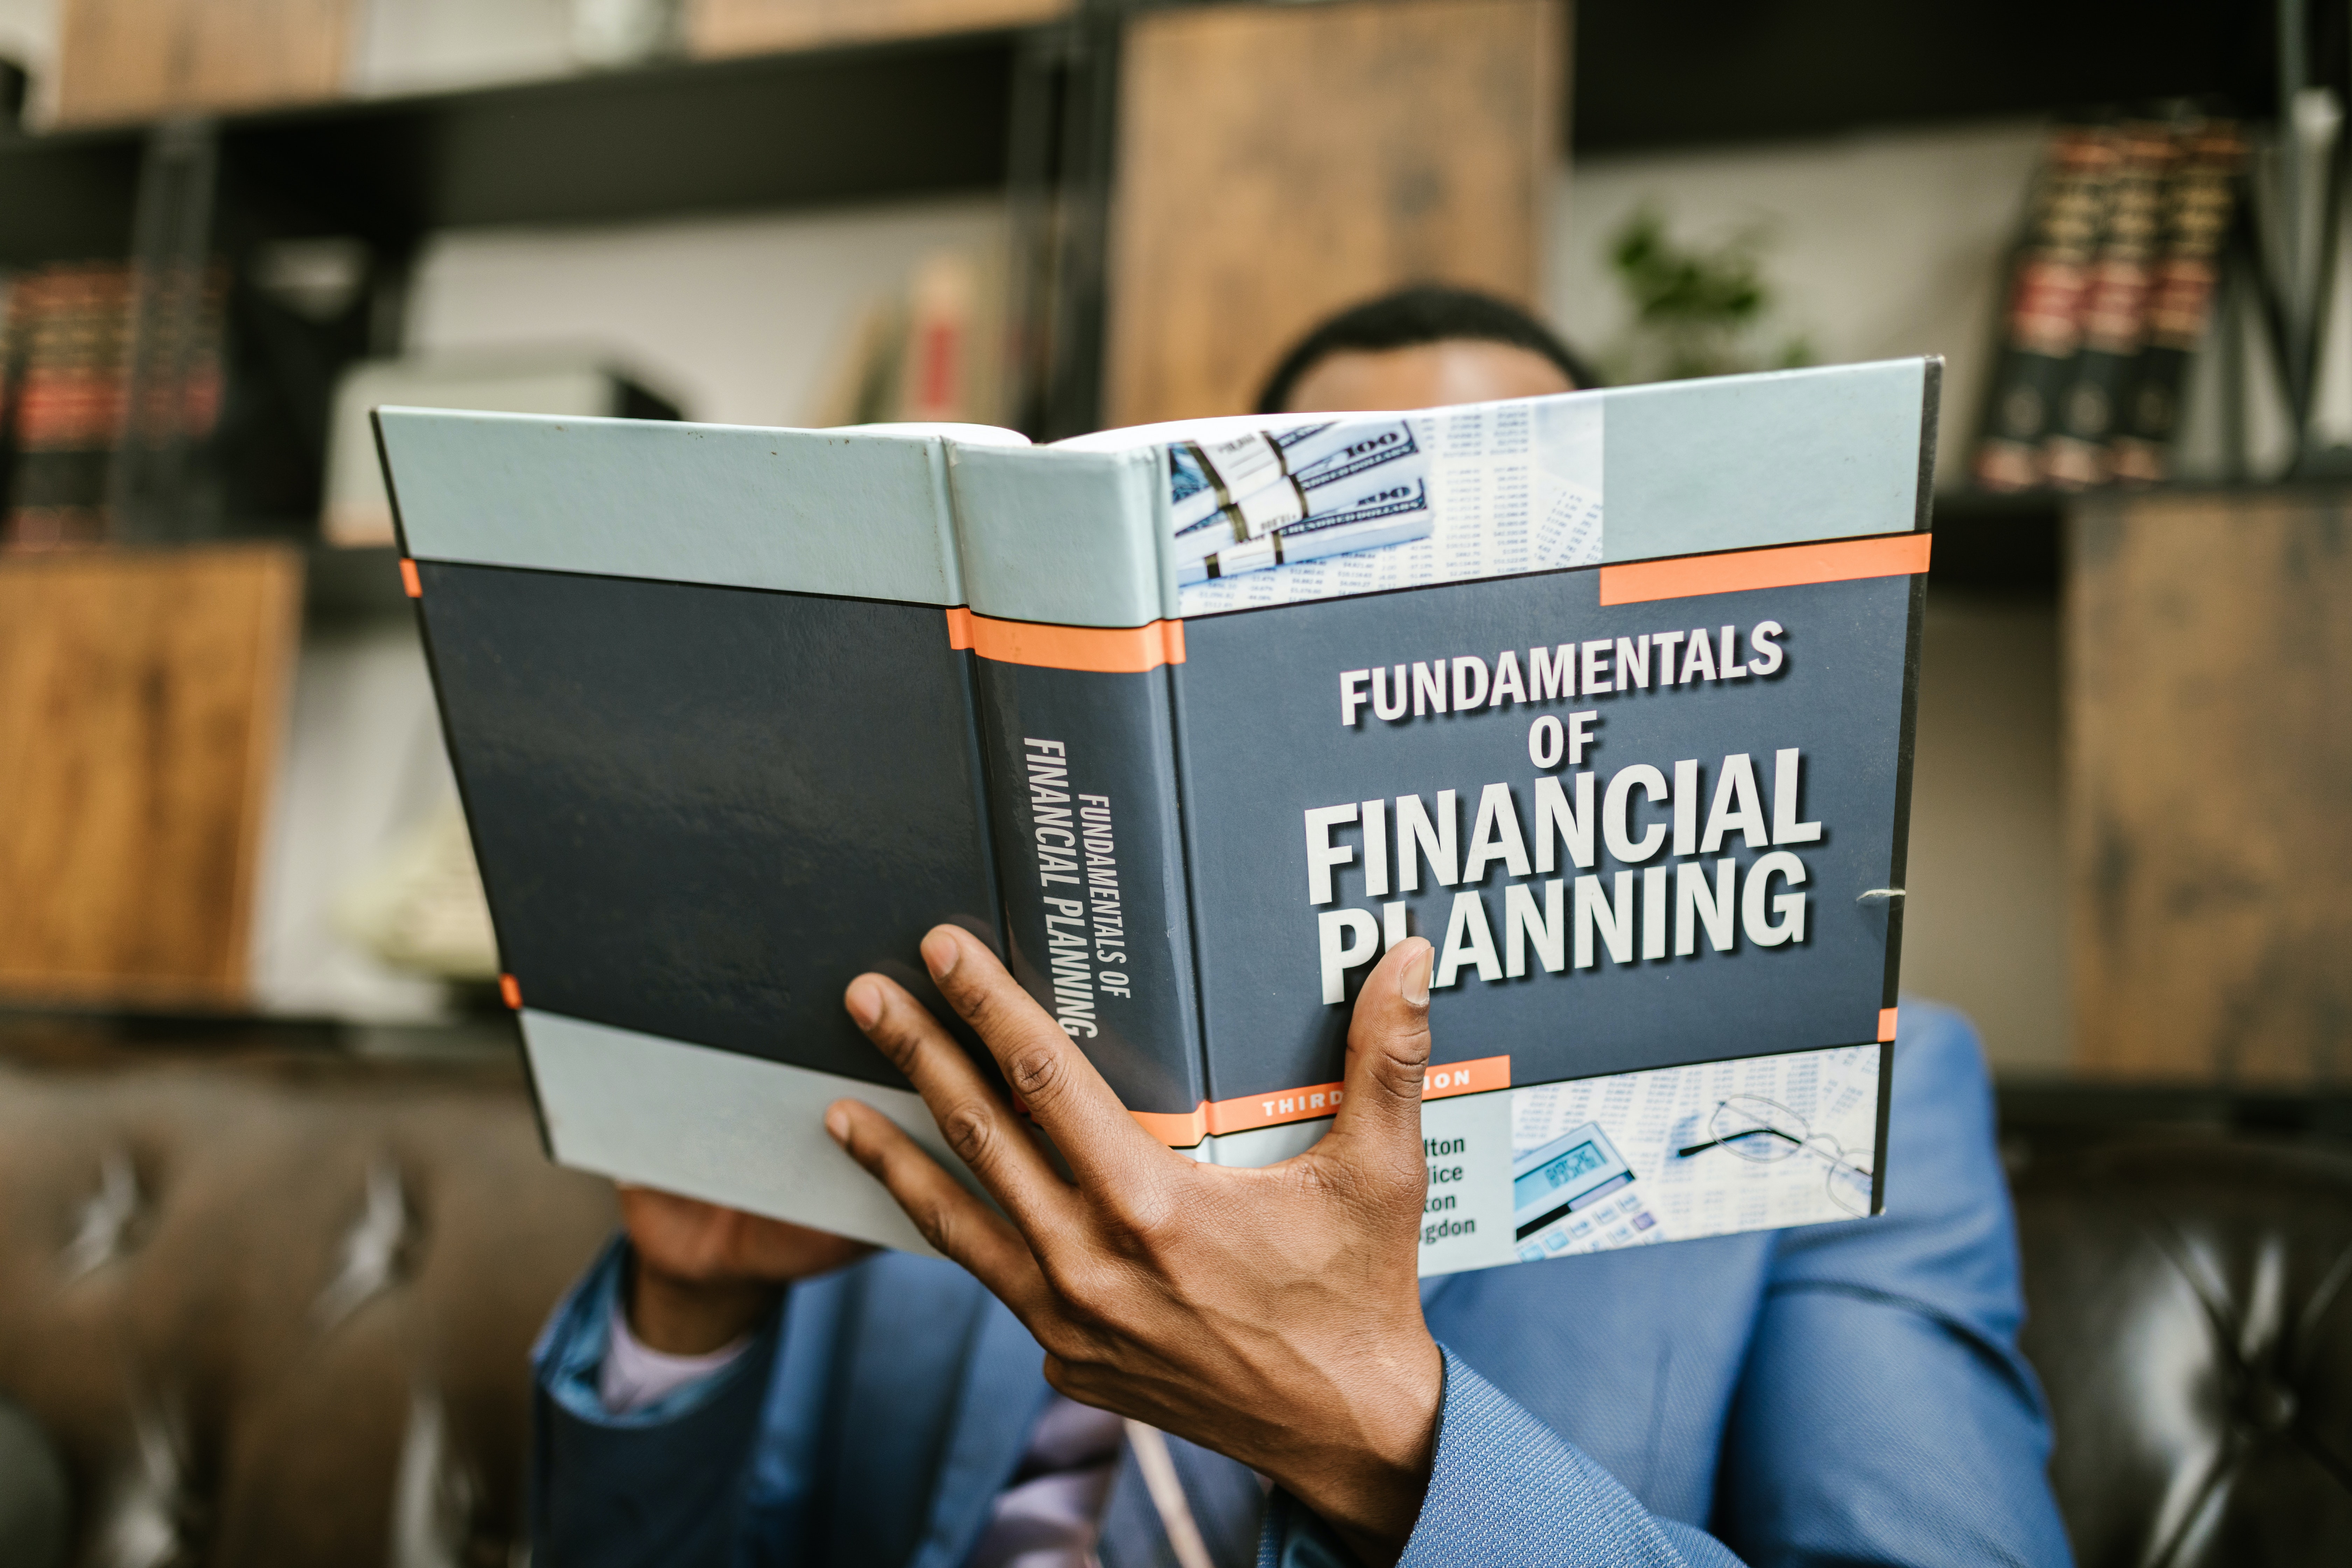 Person holding up book titled "Fundamentals of Financial Planning"